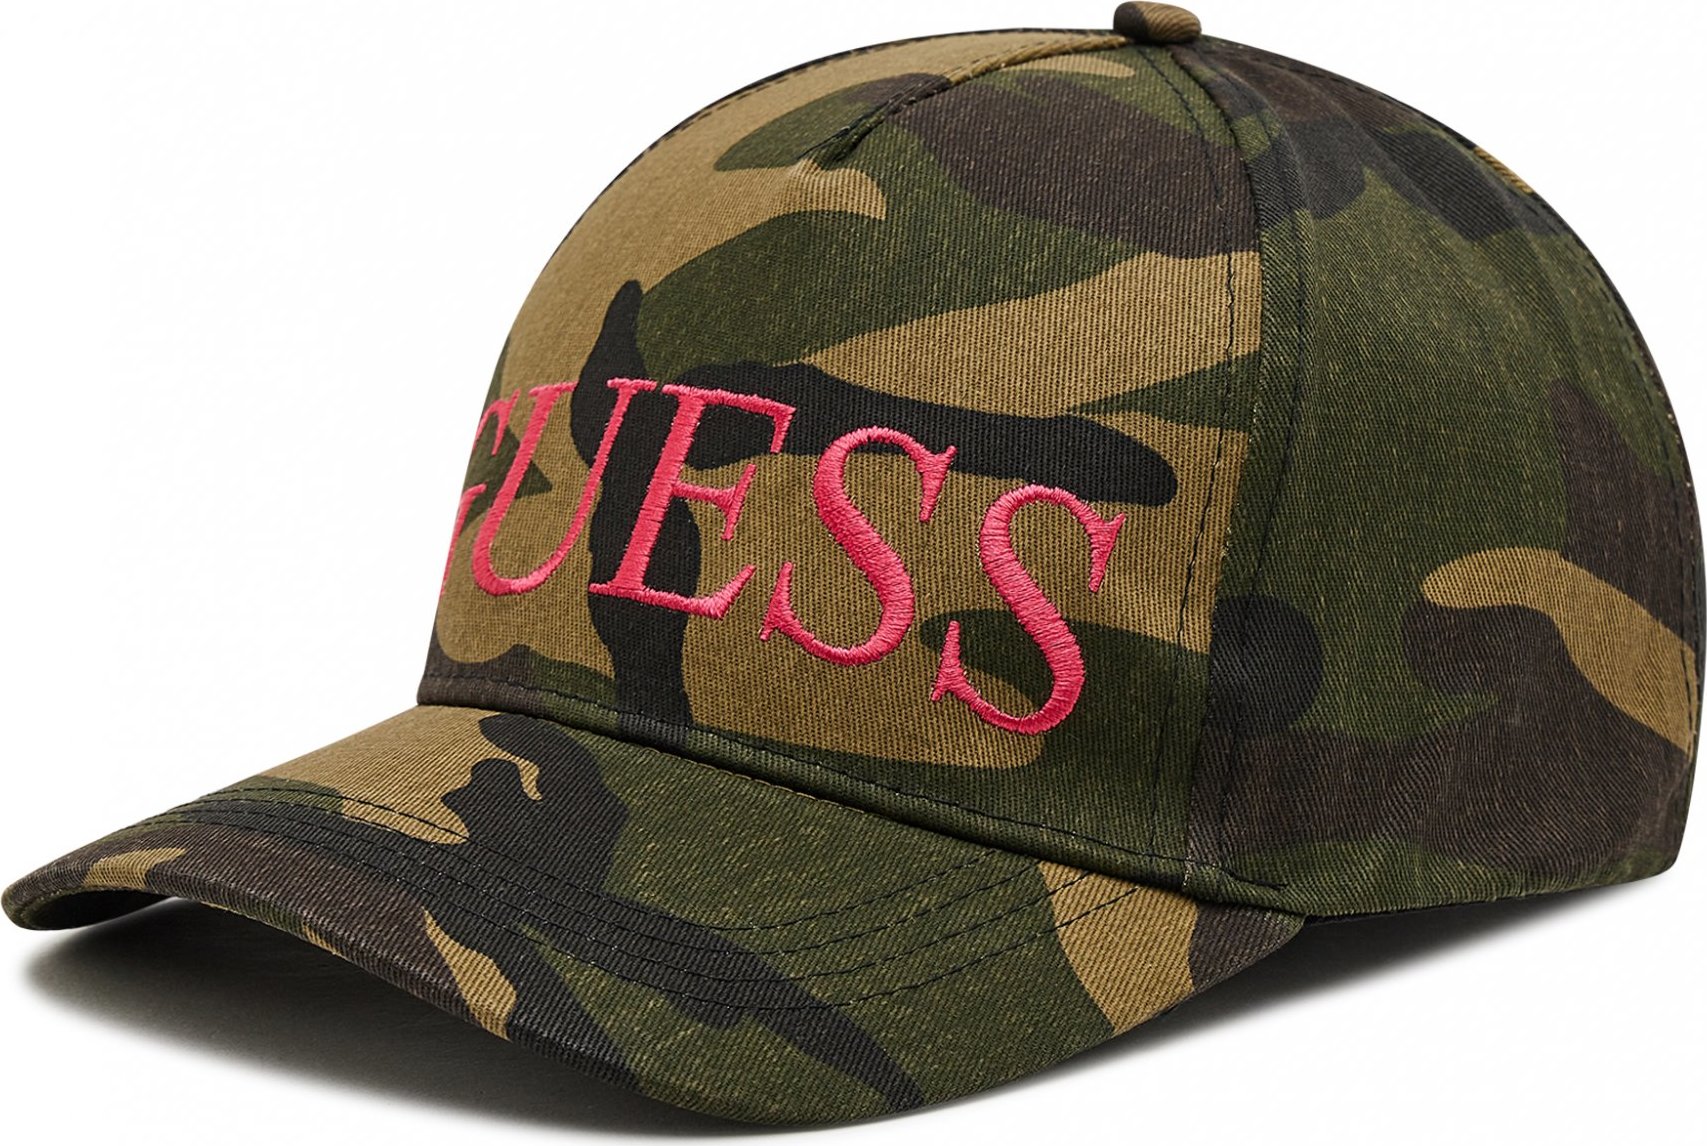 Guess Not Coordinated Hats AW8632 COT01